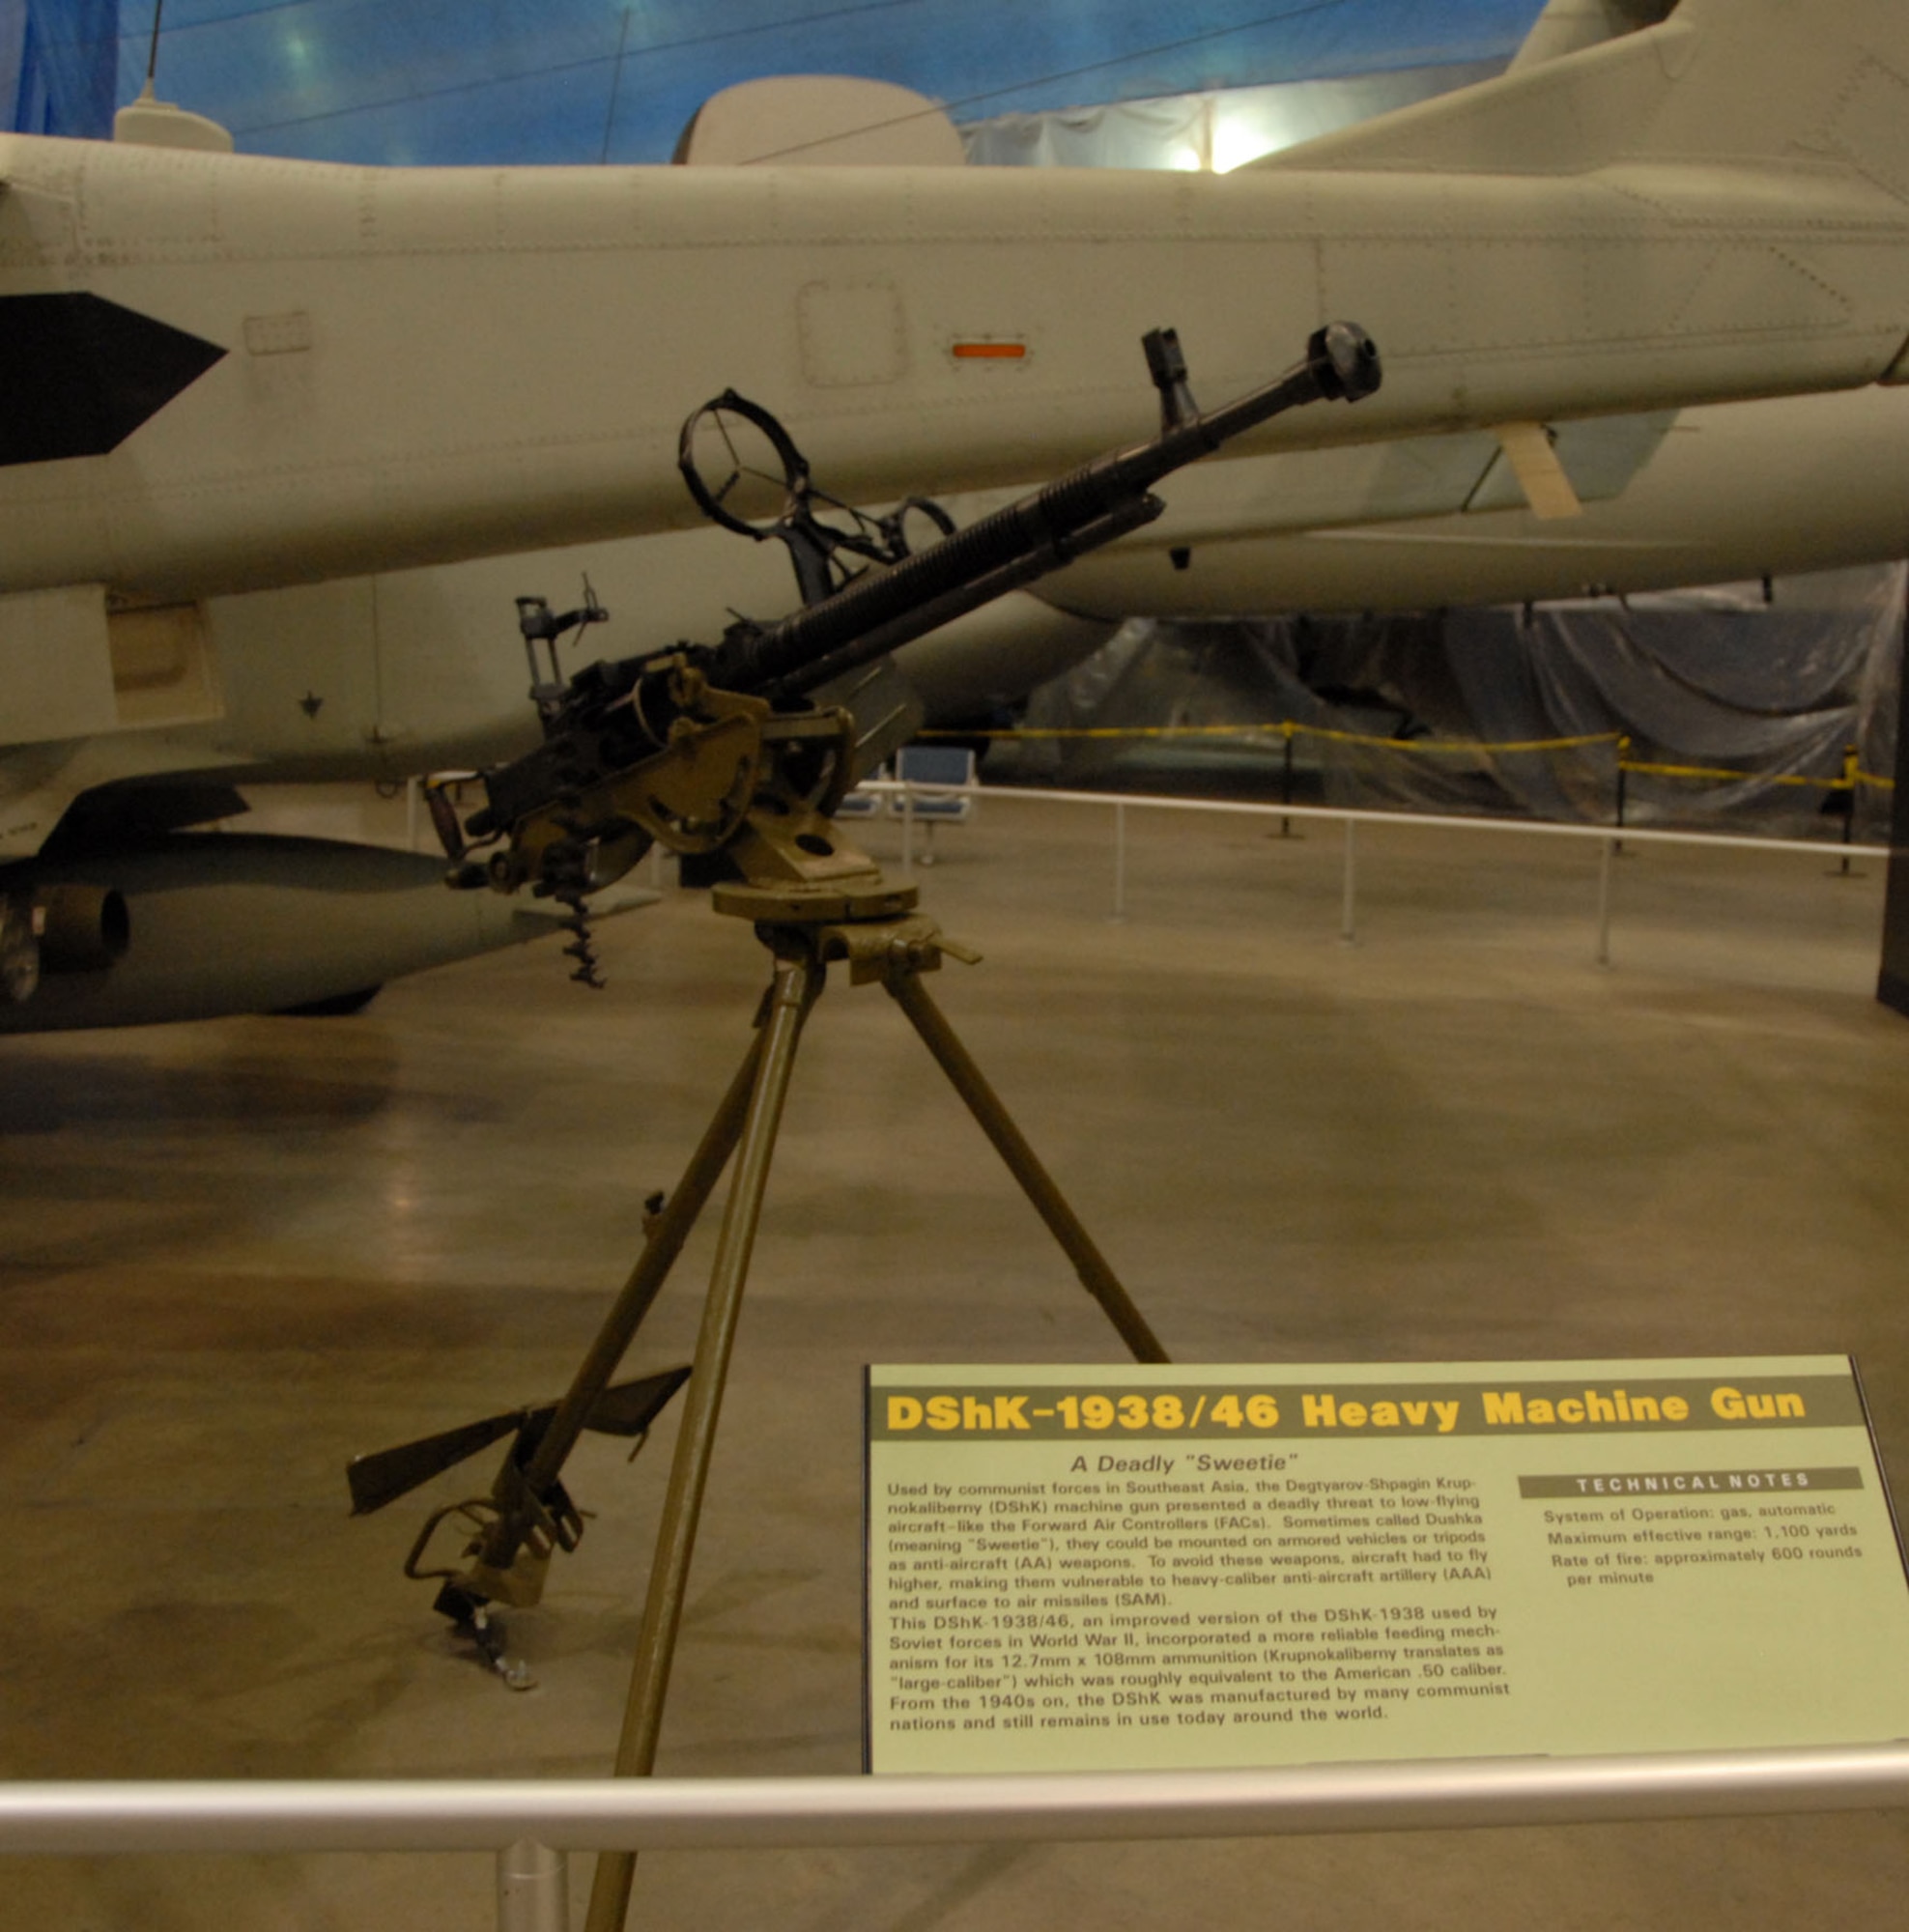 DAYTON, Ohio - The DShK-1938/46 Heavy Machine Gun on display in the Southeast Asia War Gallery at the National Museum of the U.S. Air Force. (U.S. Air Force photo)